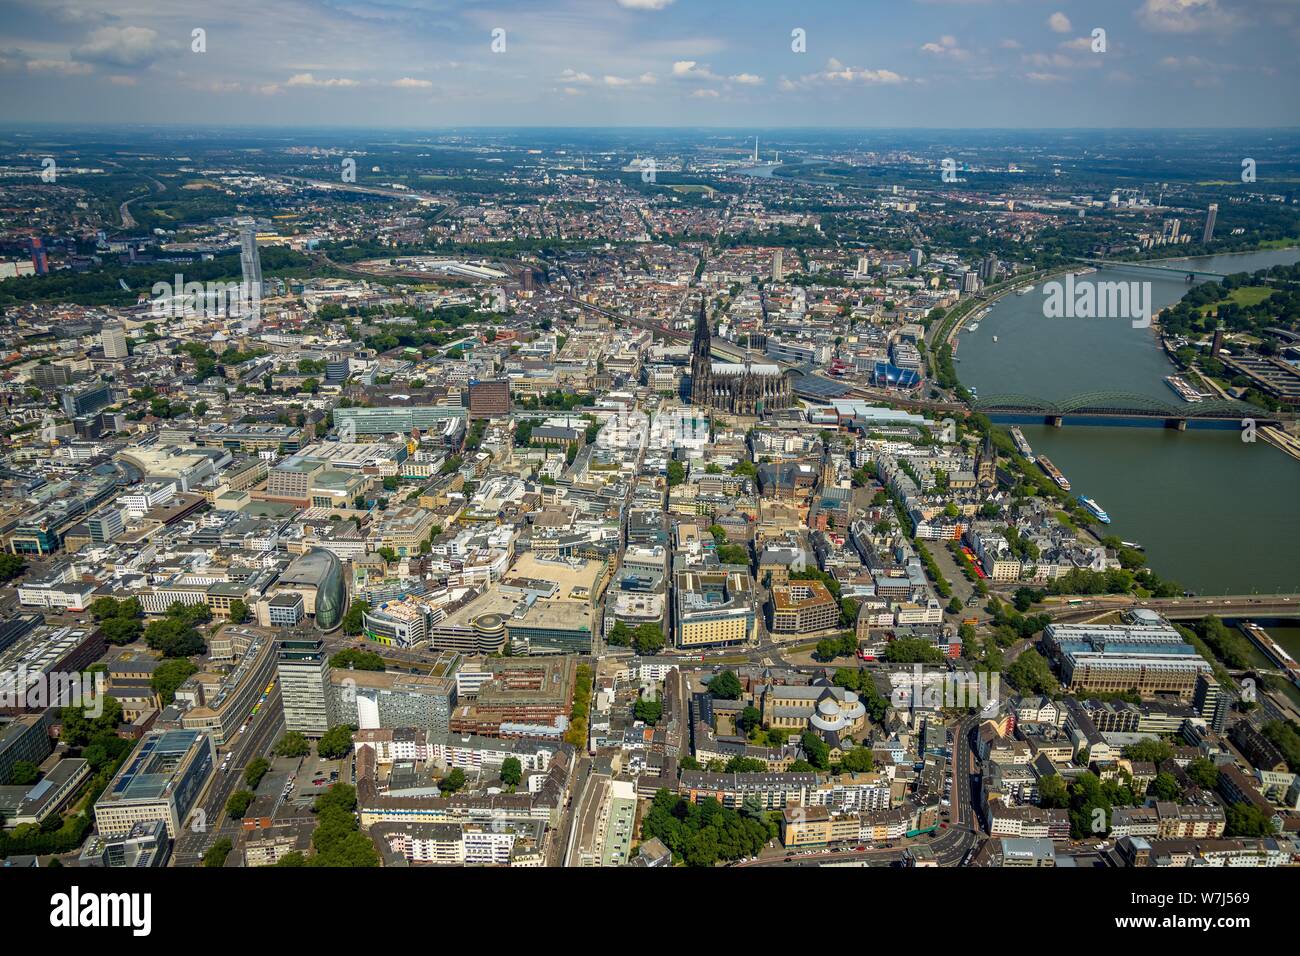 Aerial view, city centre on the Rhine with Cologne Cathedral, Cologne, Rhineland, North Rhine-Westphalia, Germany Stock Photo